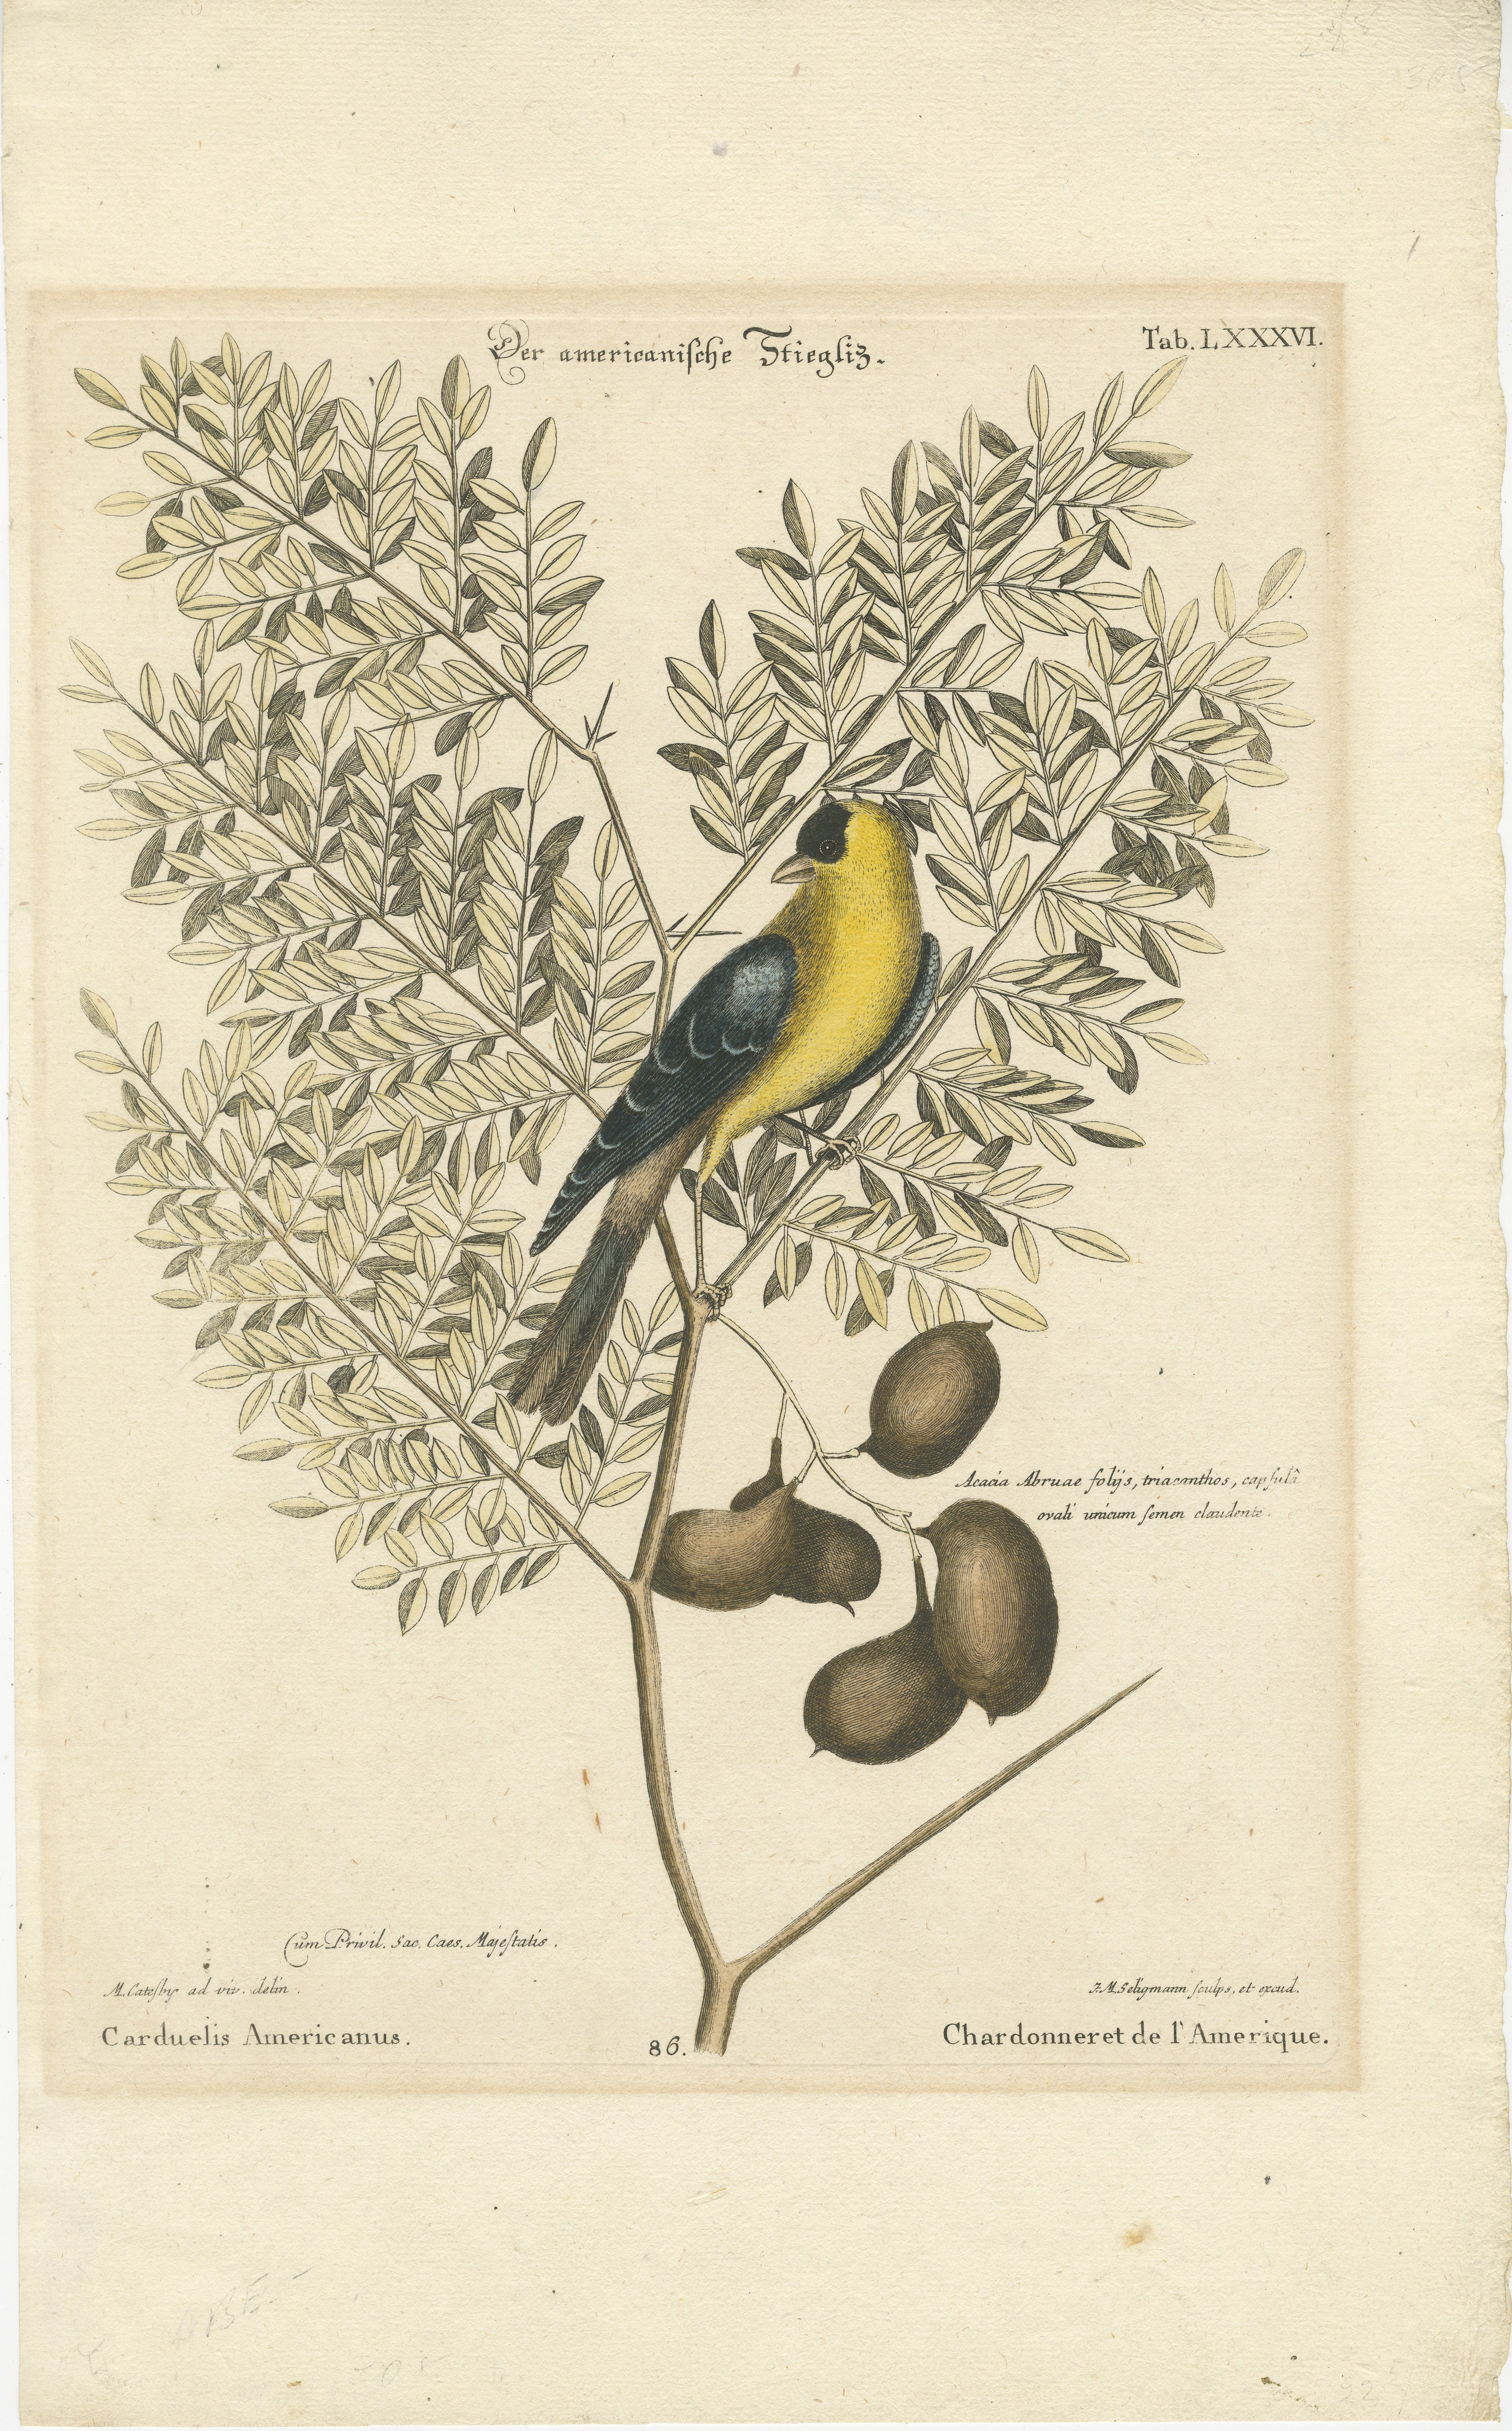 The illustration showcases the American Goldfinch (Spinus tristis), formerly known as Carduelis Americanus, perched gracefully upon a leafy branch. 

It is a detailed 18th-century rendering that captures the vibrant yellow plumage of the male